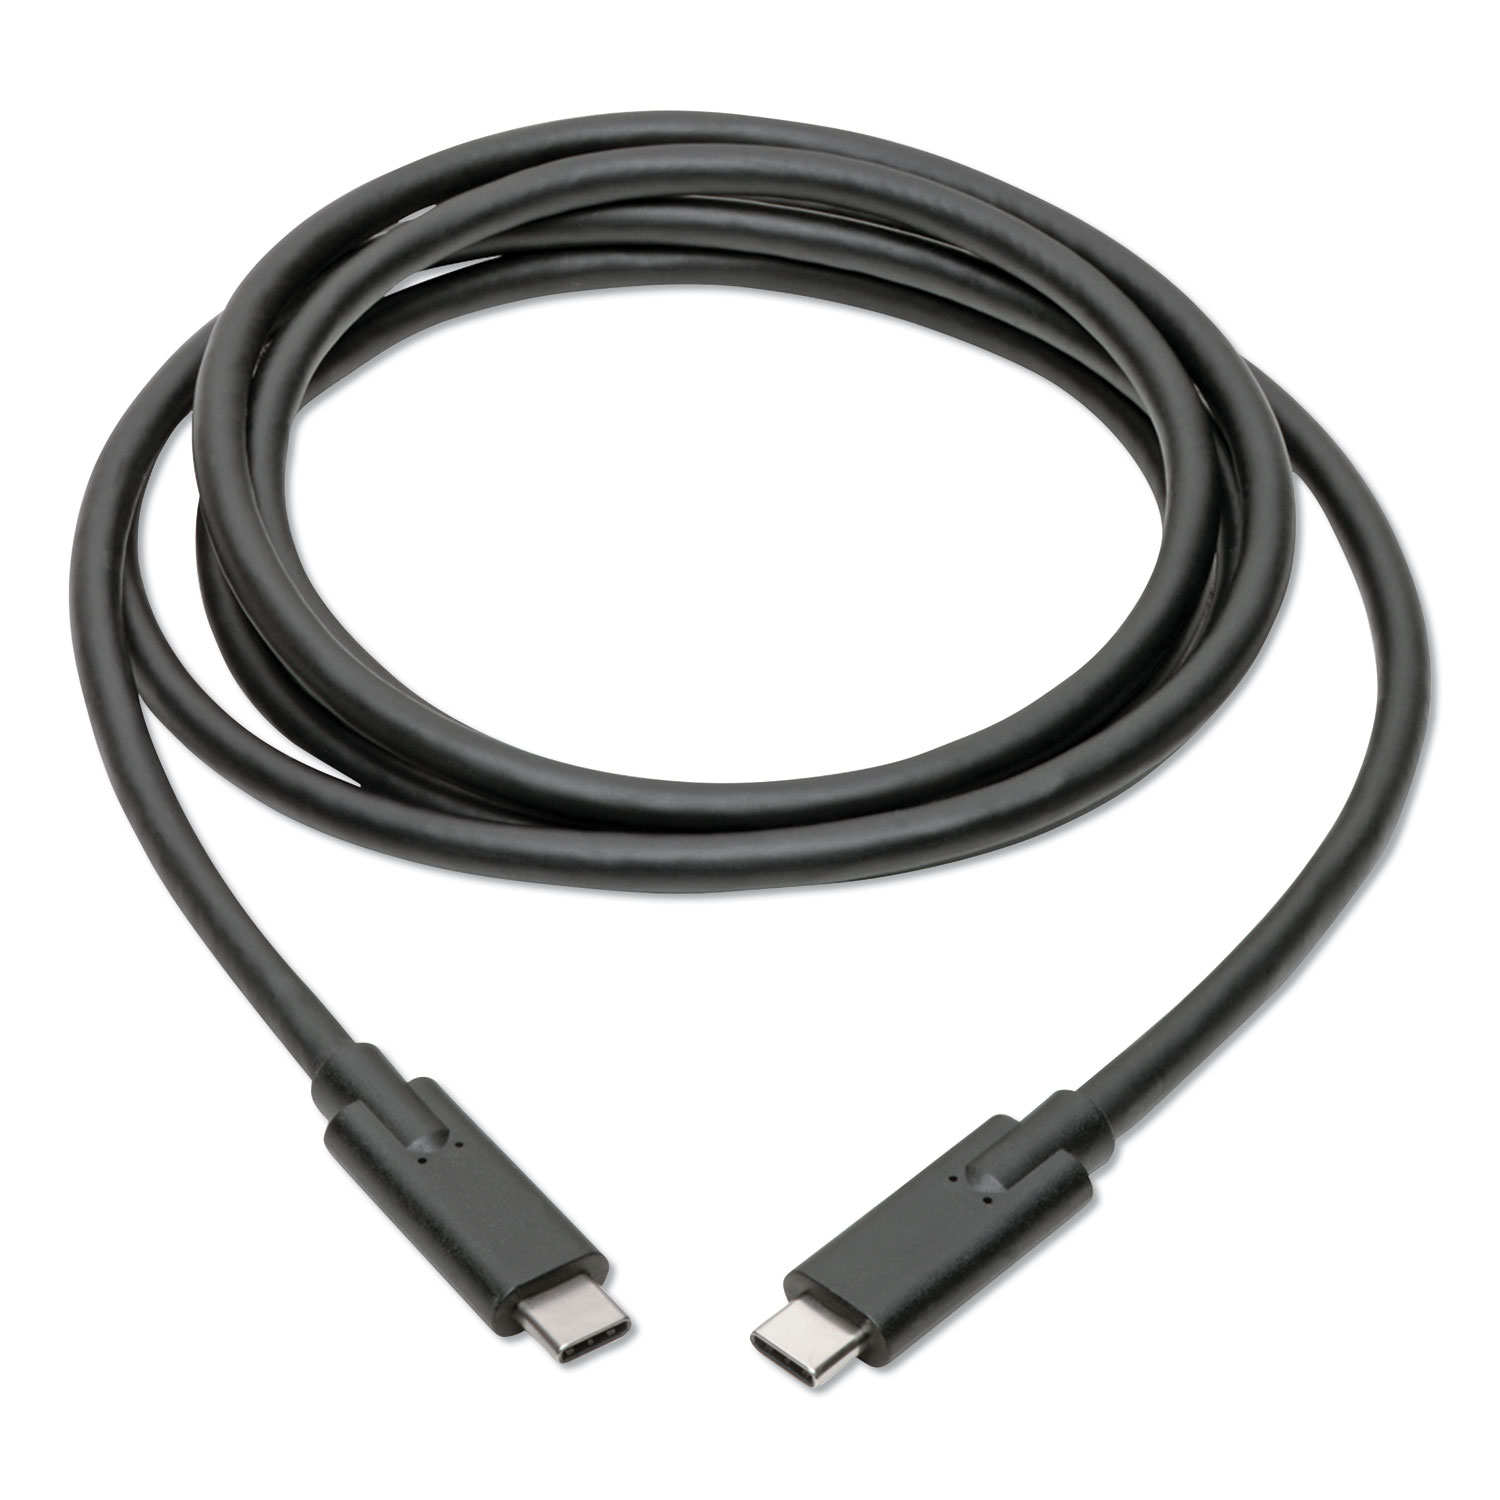 USB 3.1 Gen 1 (5 Gbps) Cable, USB Type-C (USB-C) to USB Type-C (M/M), 5A, 6 ft